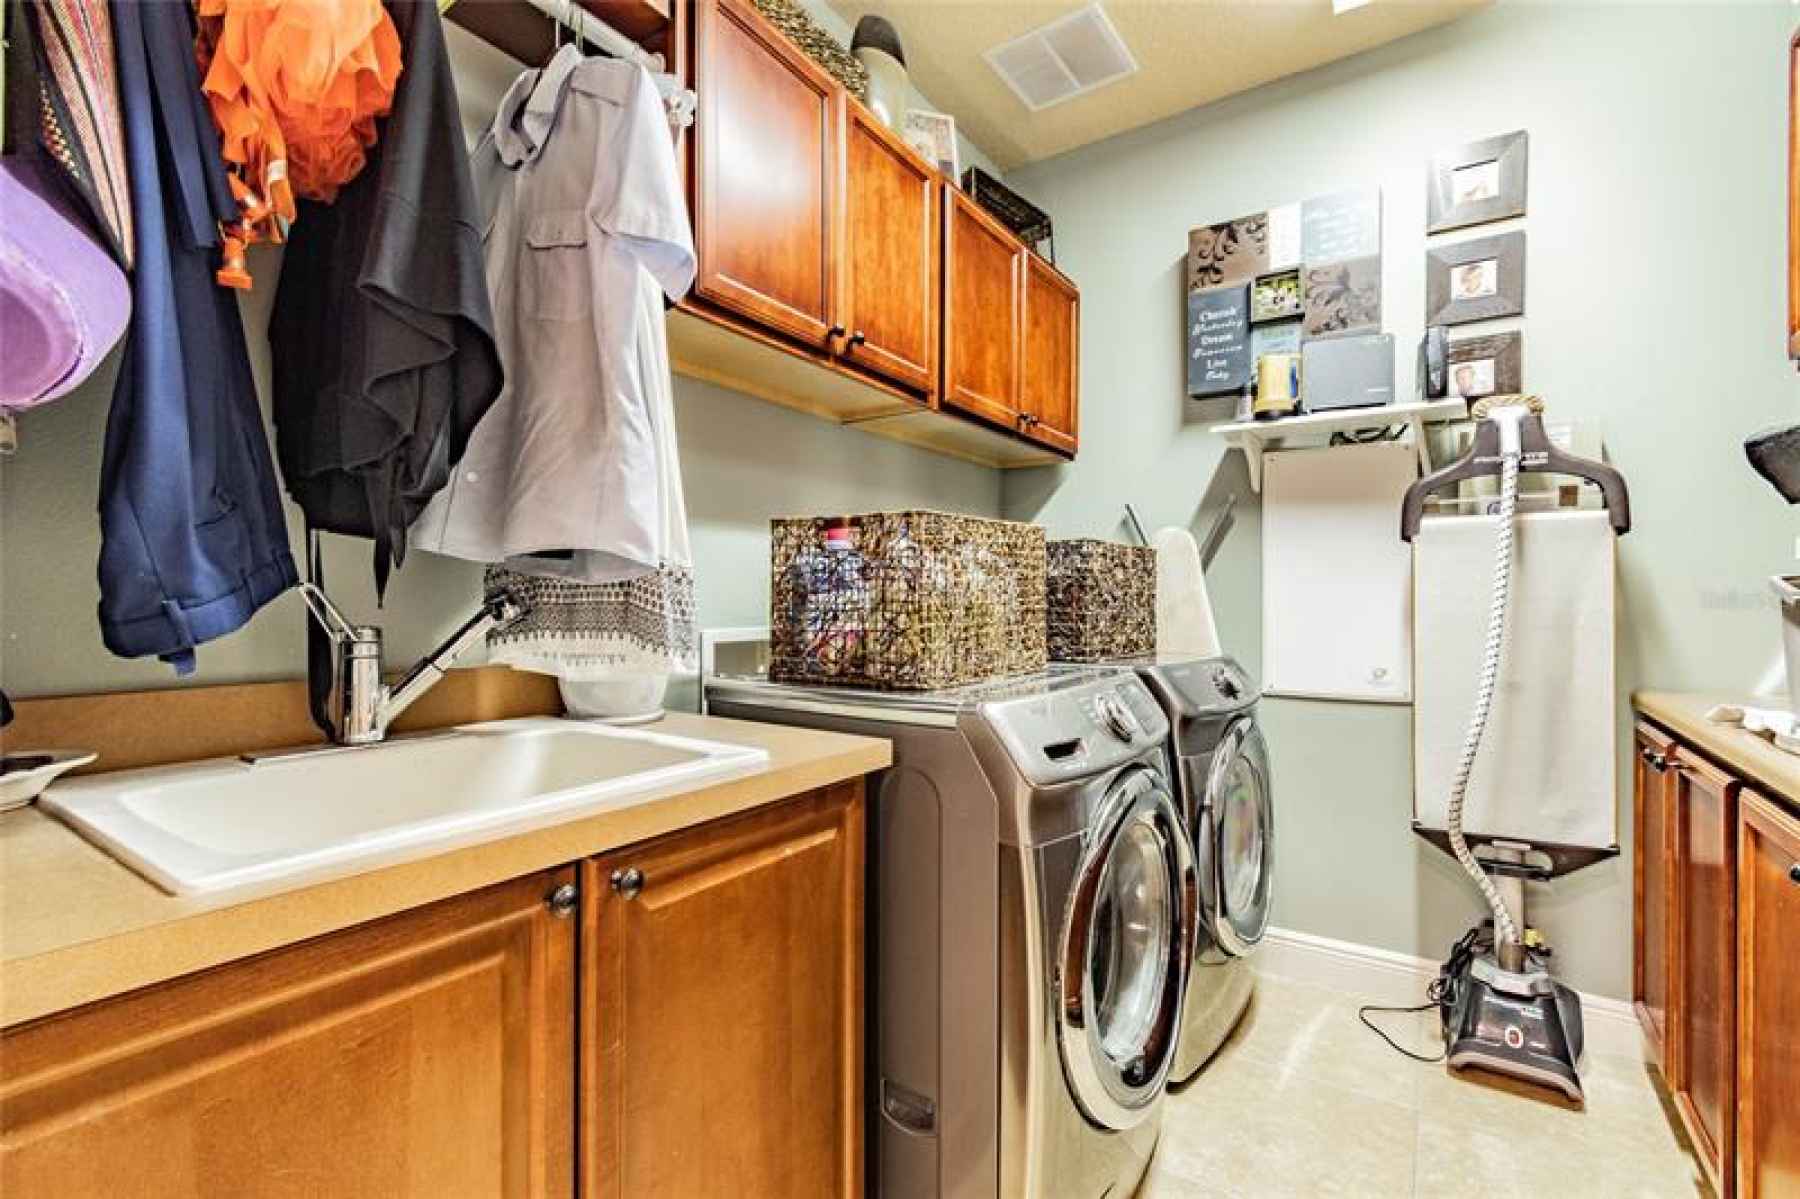 Laundry room off kitchen and garage